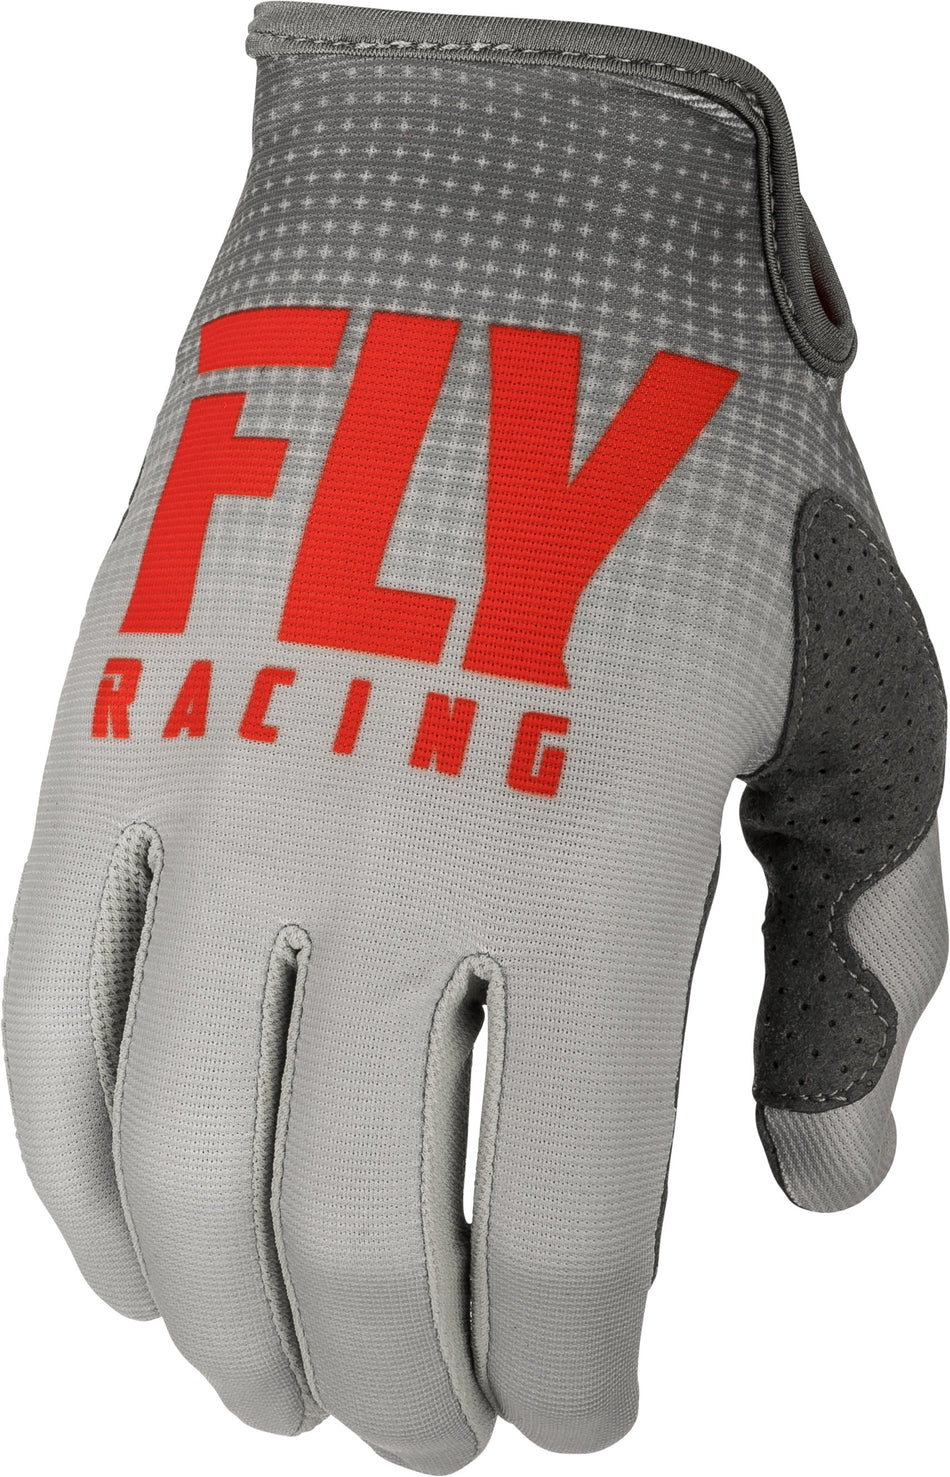 FLY RACING Lite Gloves Red/Grey Sz 04 372-01204